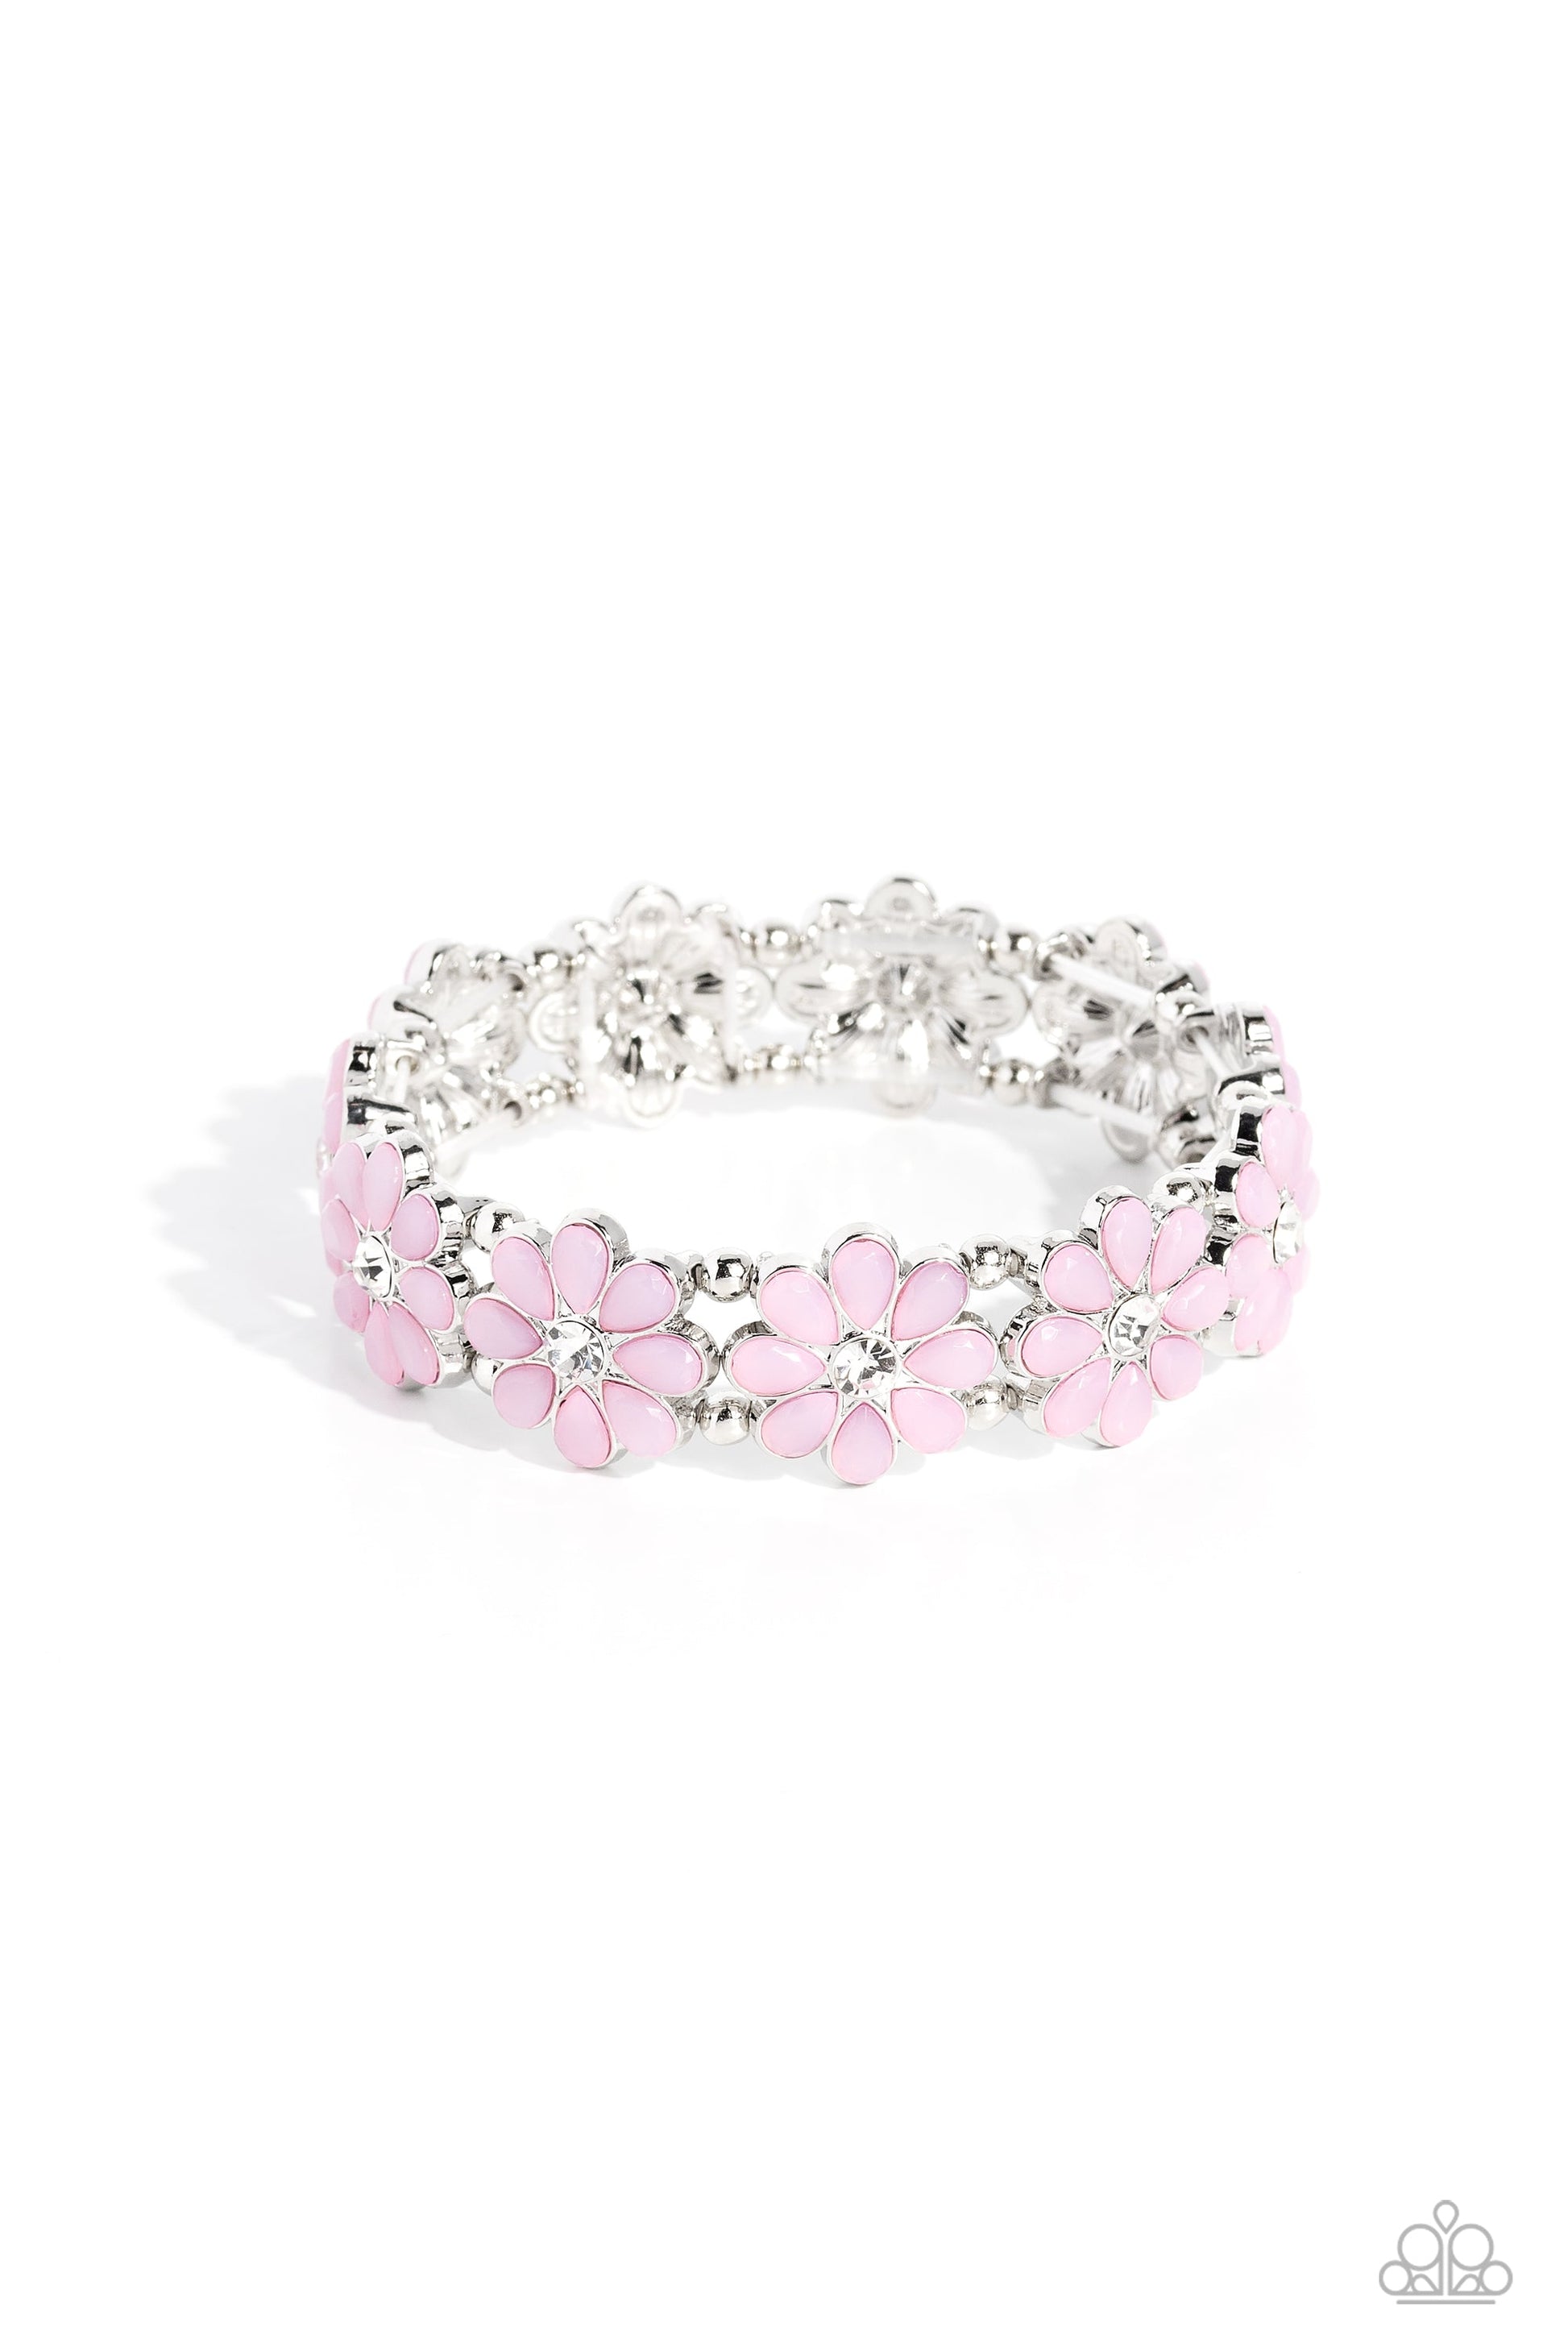 Hawaiian Holiday - Pink Flower Bracelet - Paparazzi Accessories - A collection of baby pink petals blooms from the center of a white crystal-like gem, creating a sparkling floral arrangement across the wrist. Separating each flower, silver beads are added along elastic bands for a high-sheen finish.